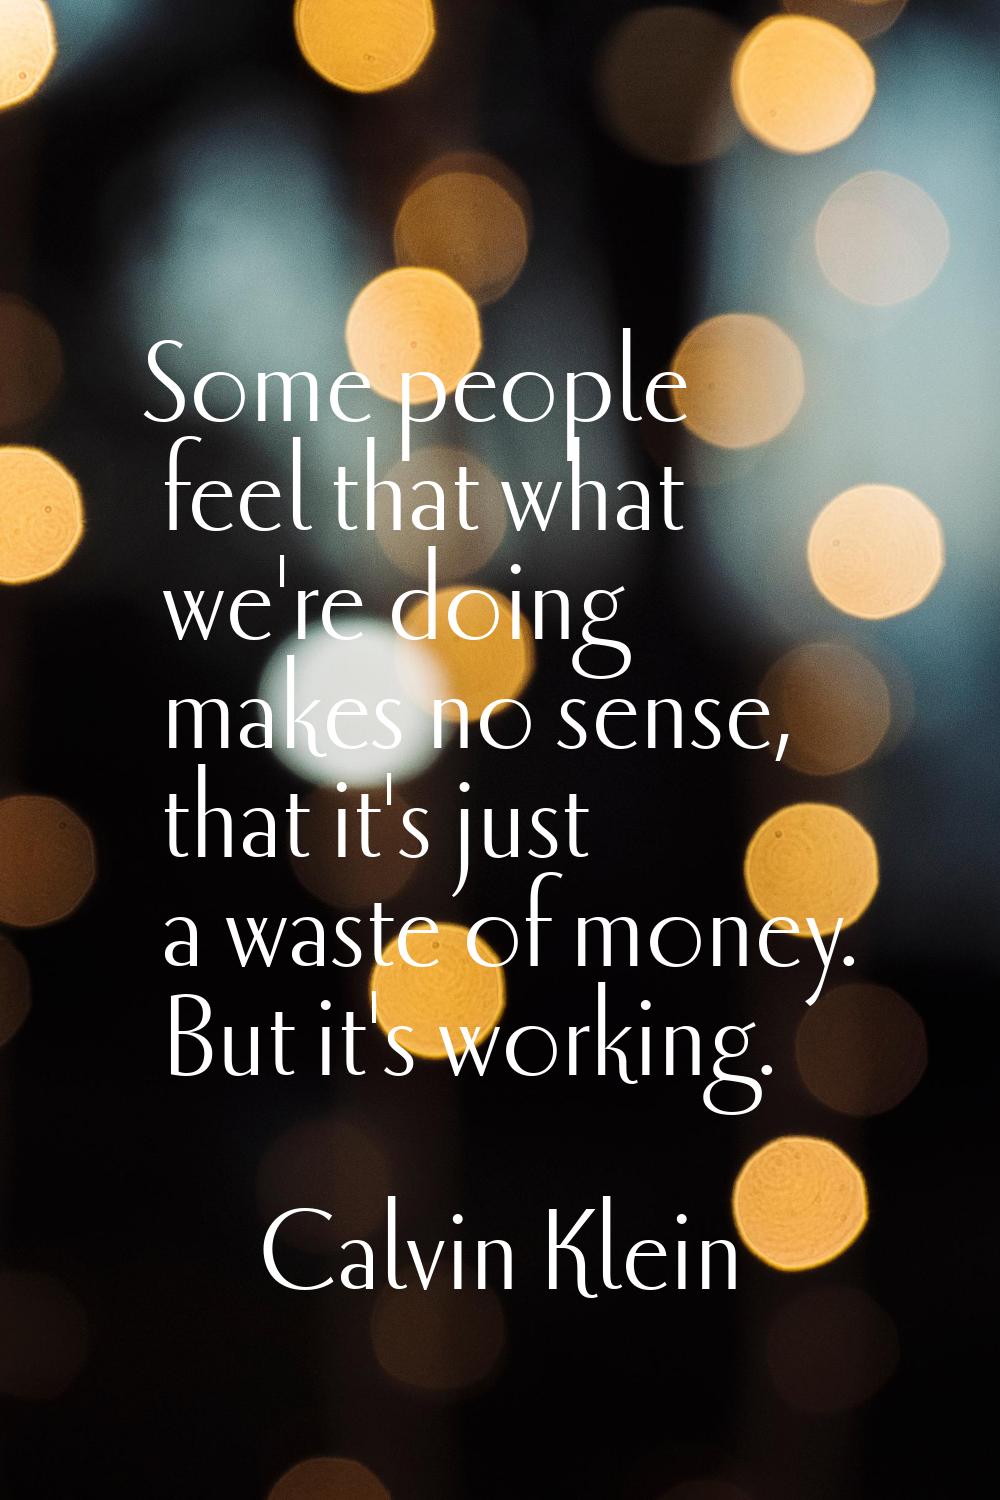 Some people feel that what we're doing makes no sense, that it's just a waste of money. But it's wo